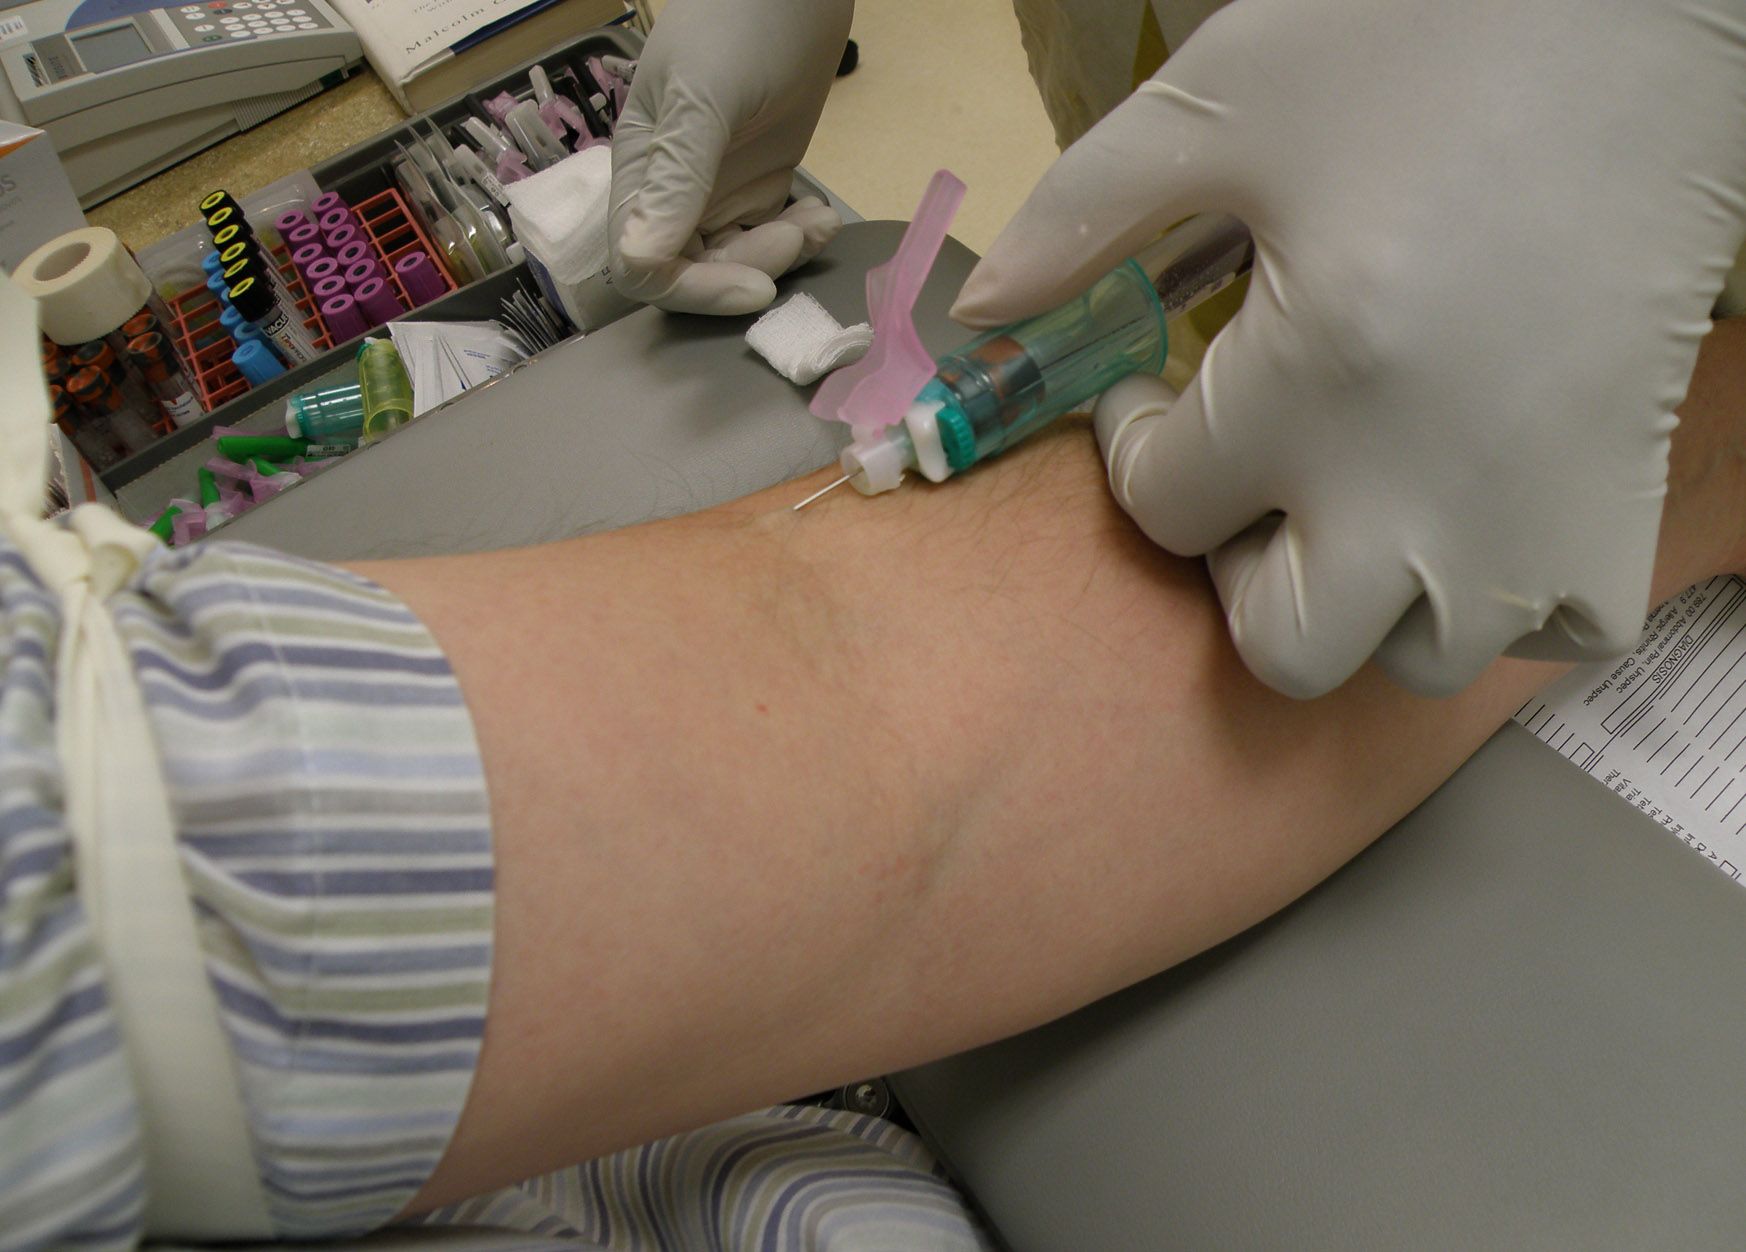 Doctors cashing in on carrying out blood tests for the police